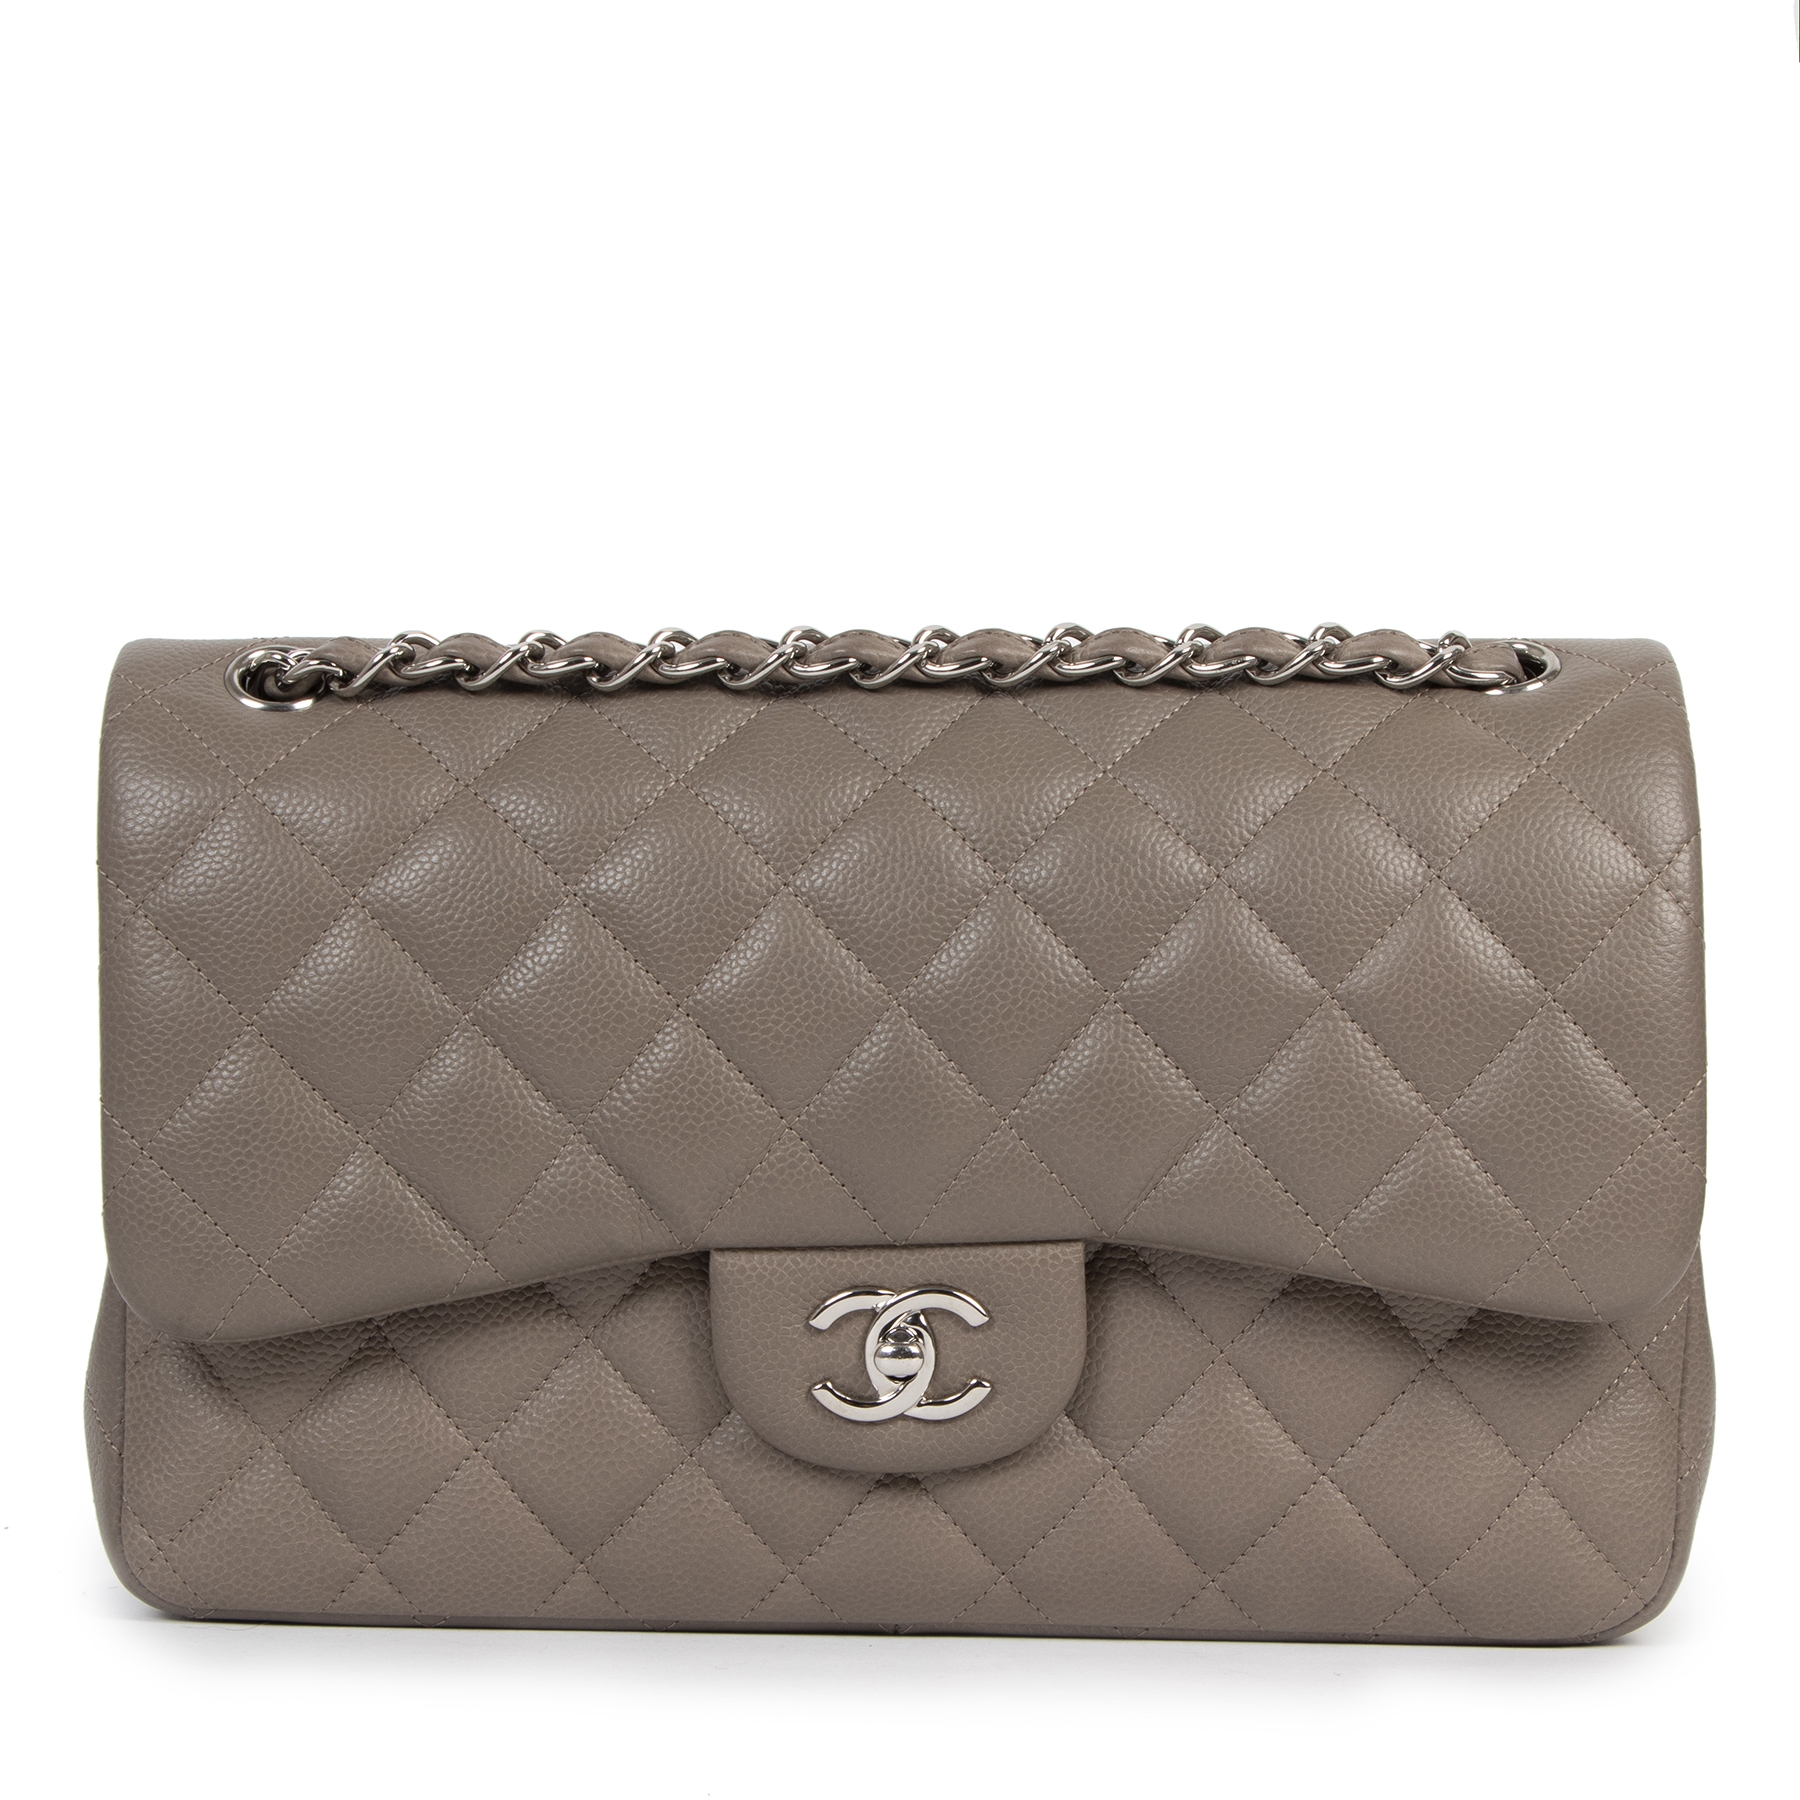 Chanel Jumbo Classic Flap PHW ○ ○ Buy and Sell Authentic Luxury